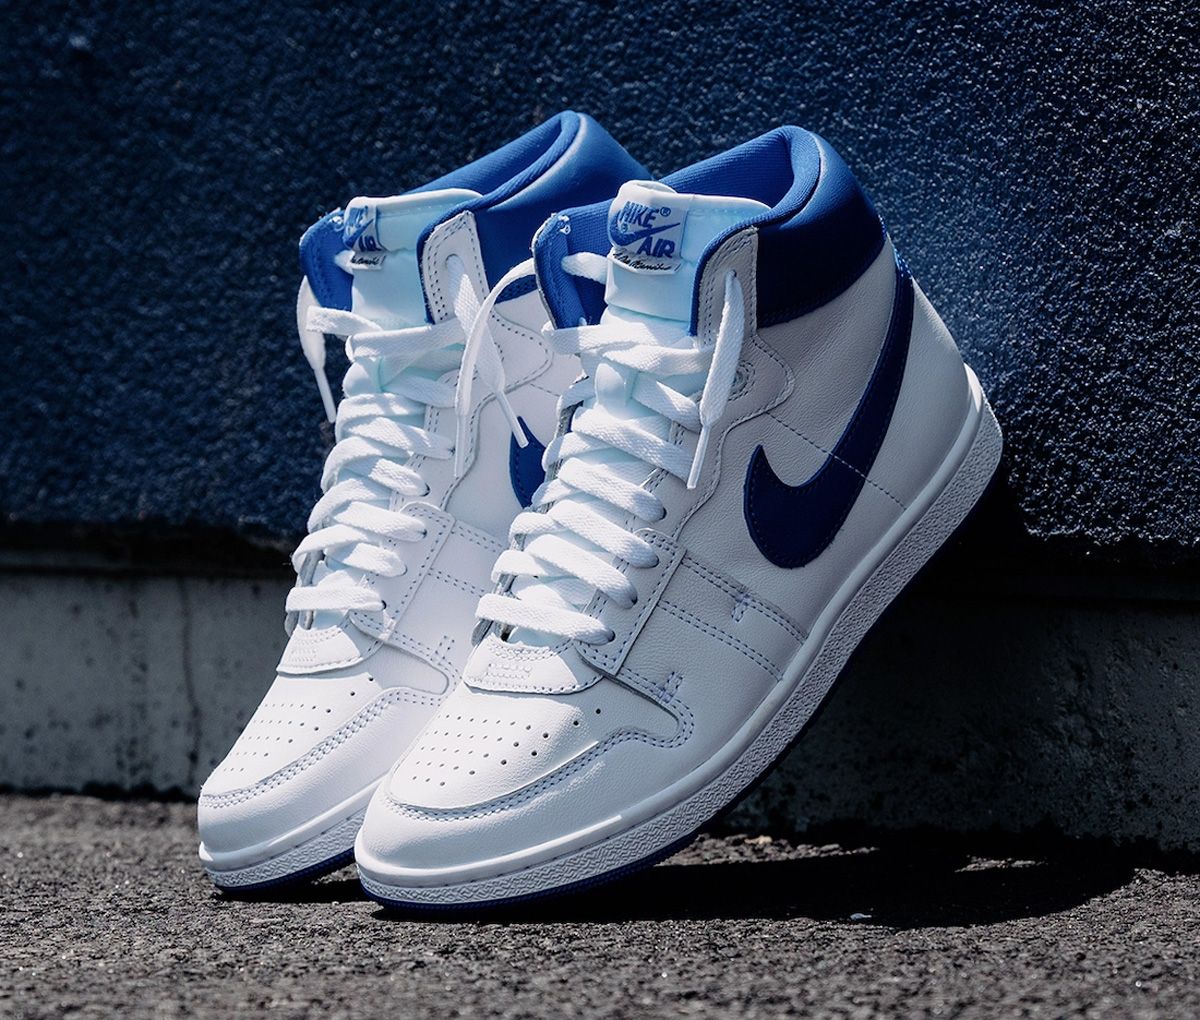 A Ma Maniére x Nike Air Ship “Game Royal” is Limited to Just 2,300 